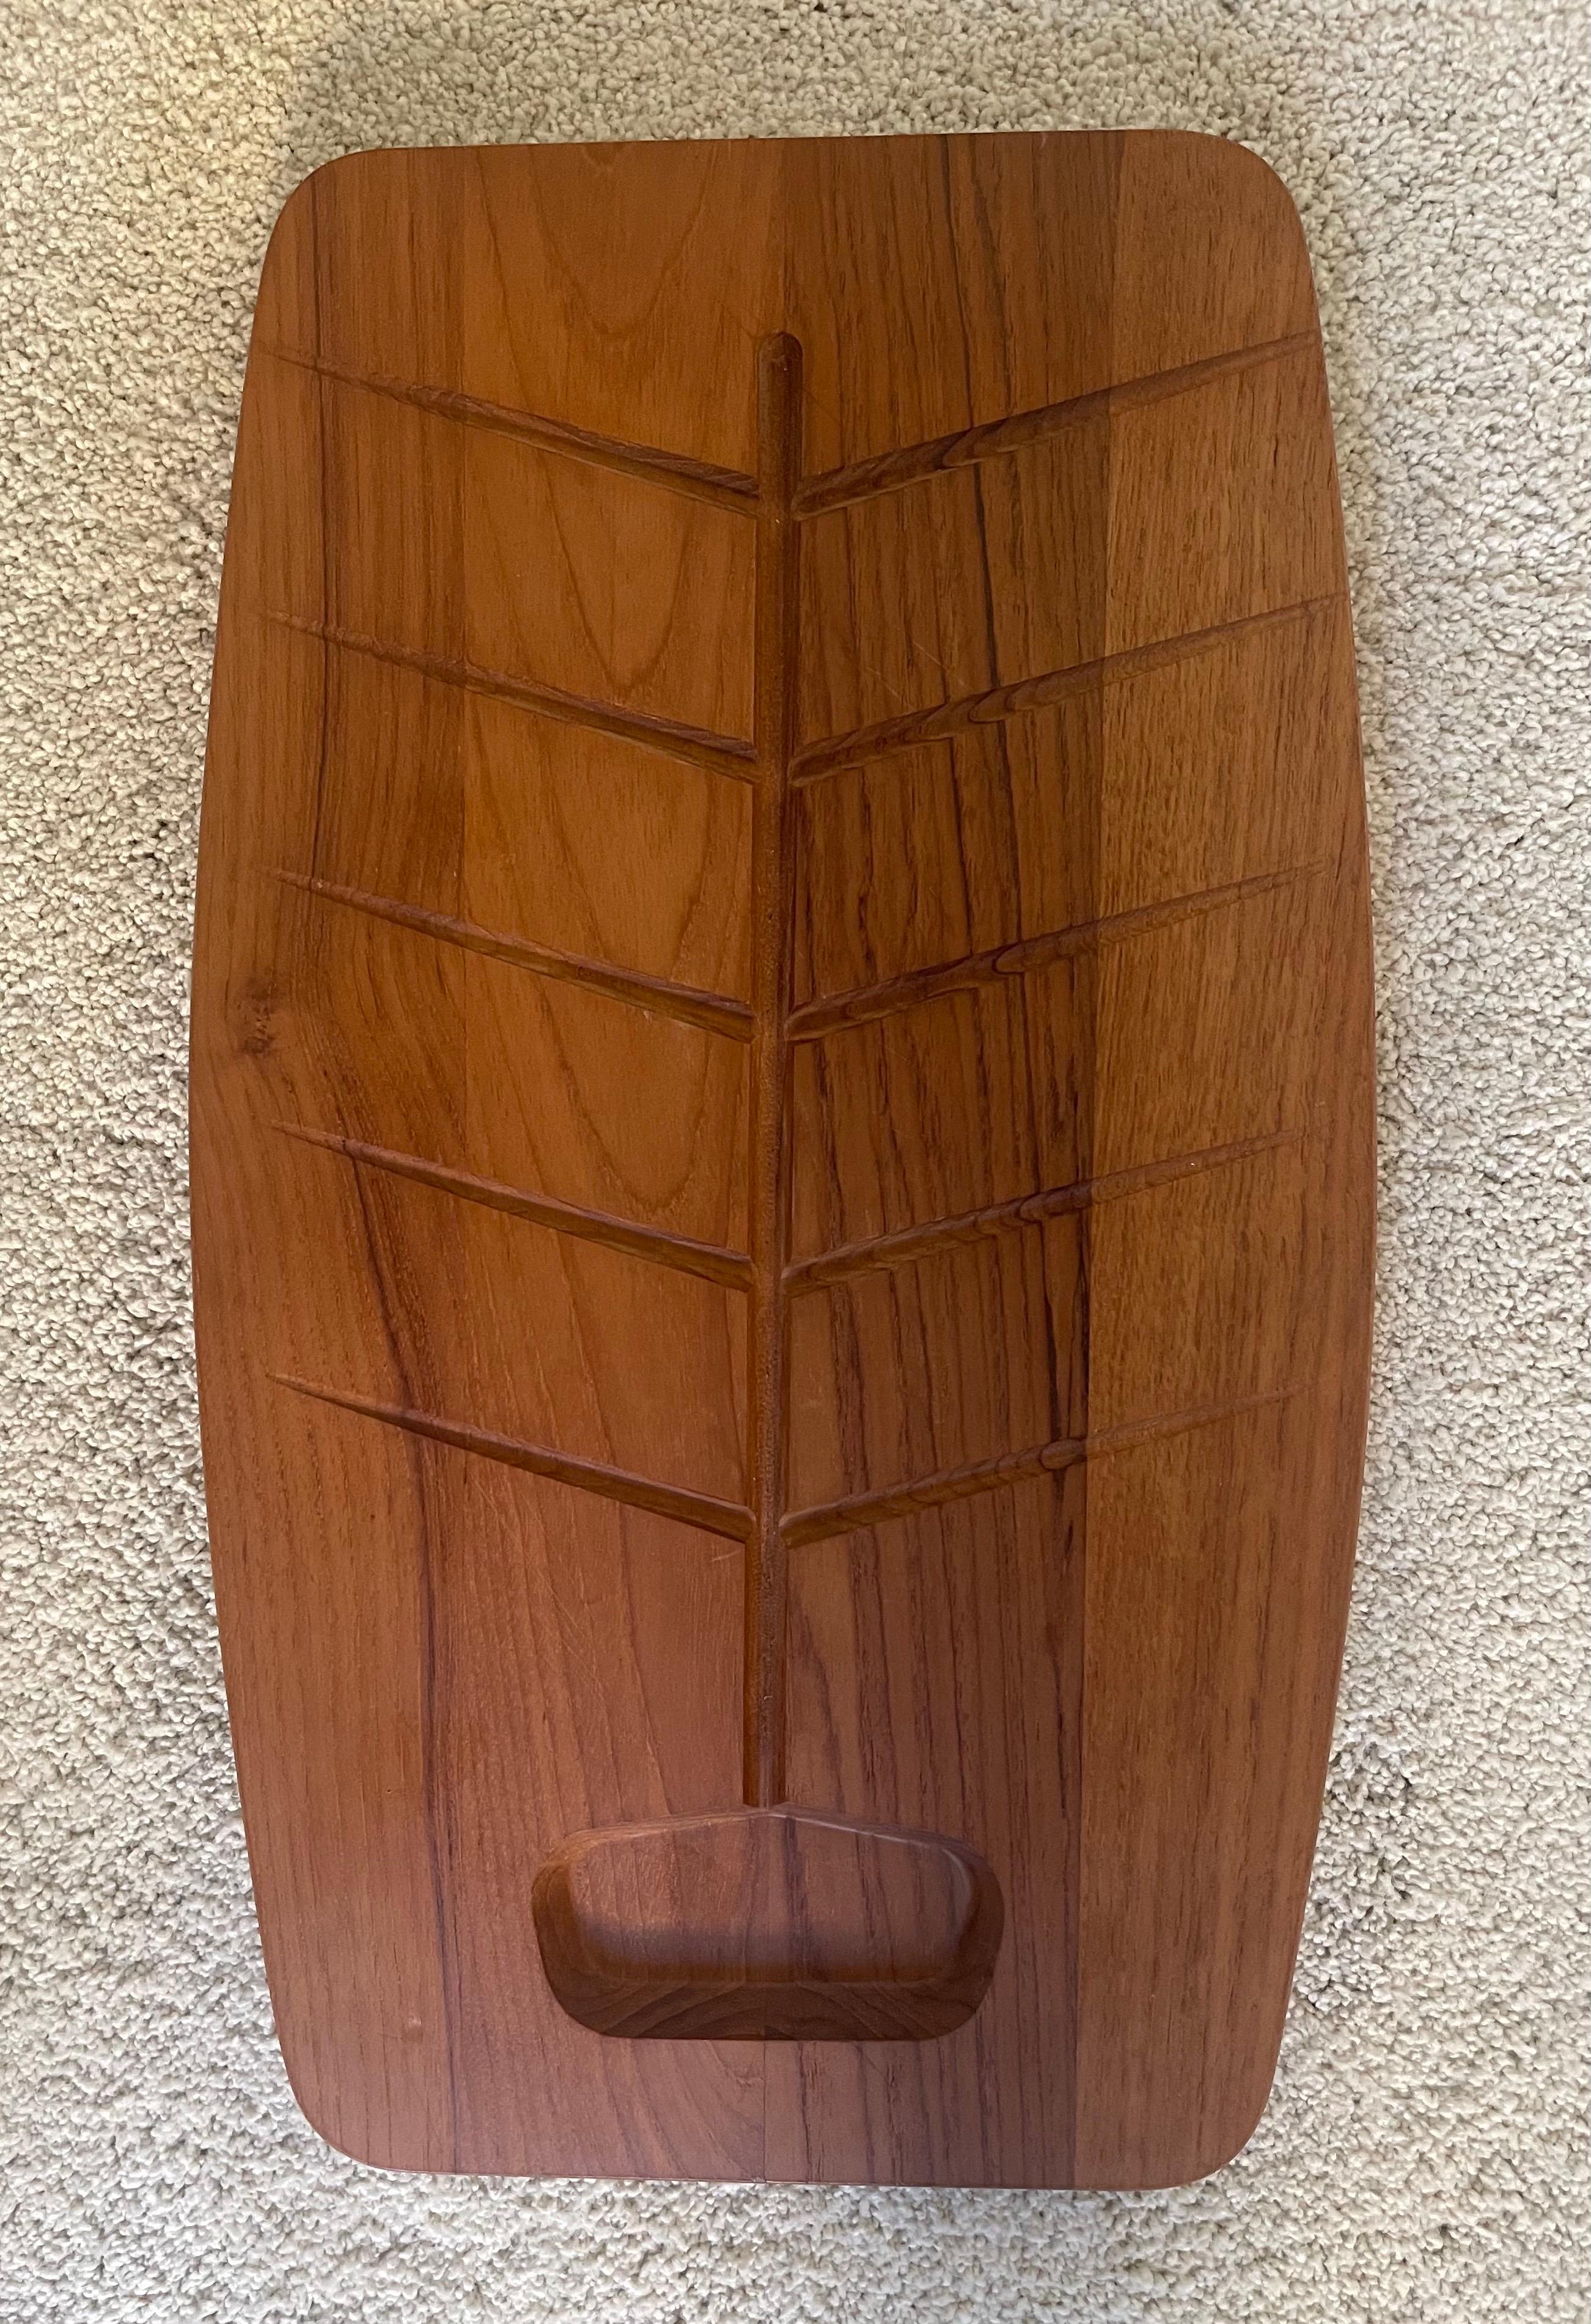 Danish Modern Staved Teak Carving / Cutting Board In Good Condition For Sale In San Diego, CA